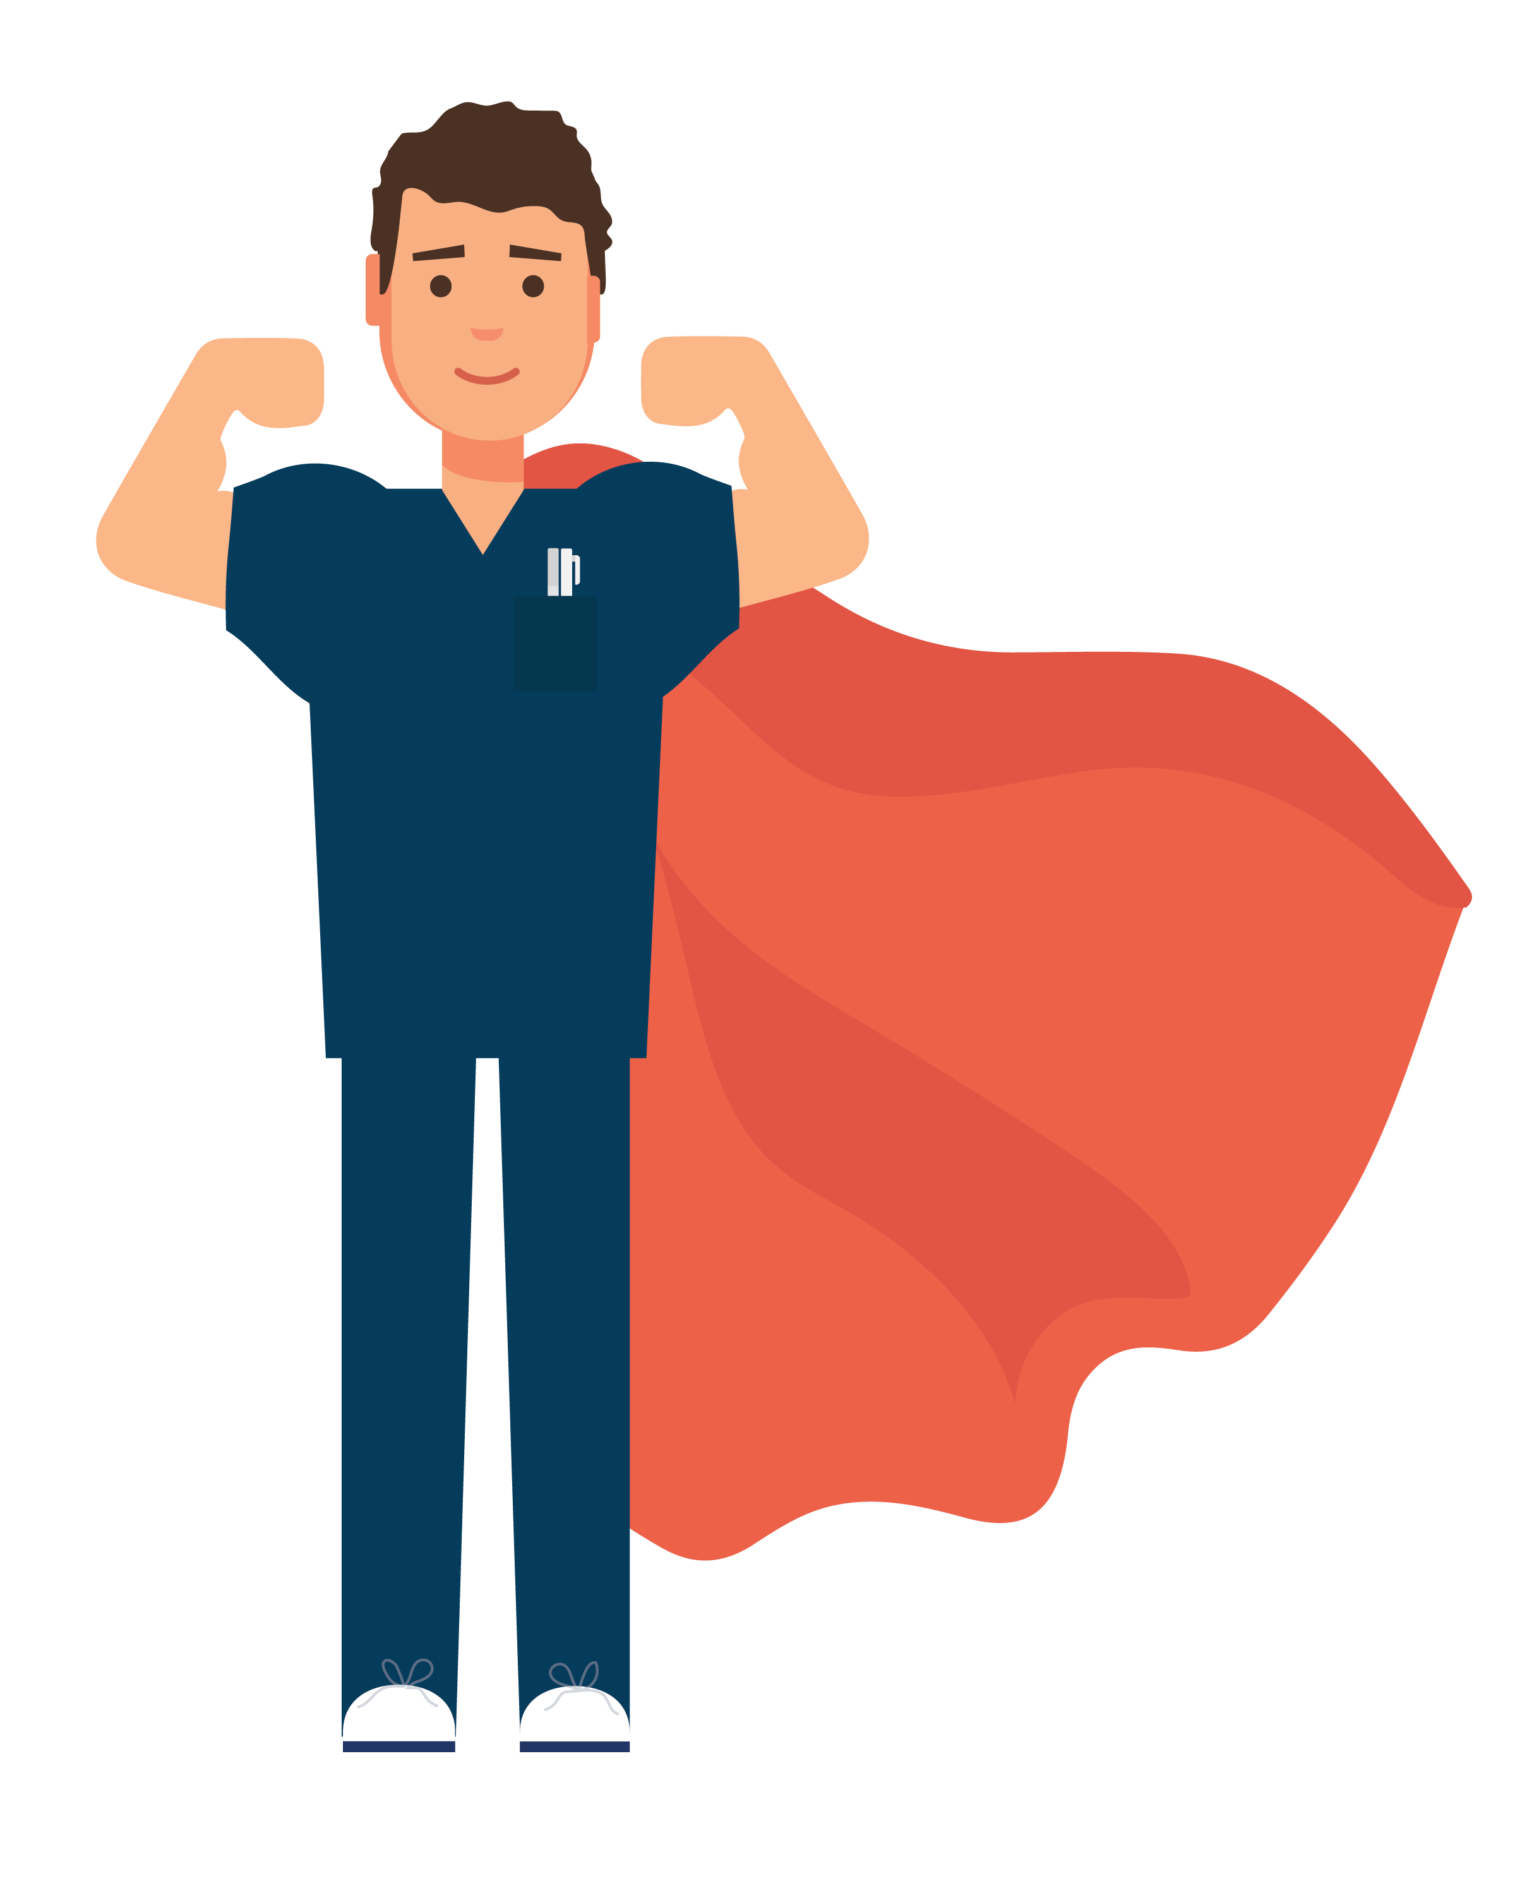 illustrationg of a man in dark blue scrubs with a superhero cap